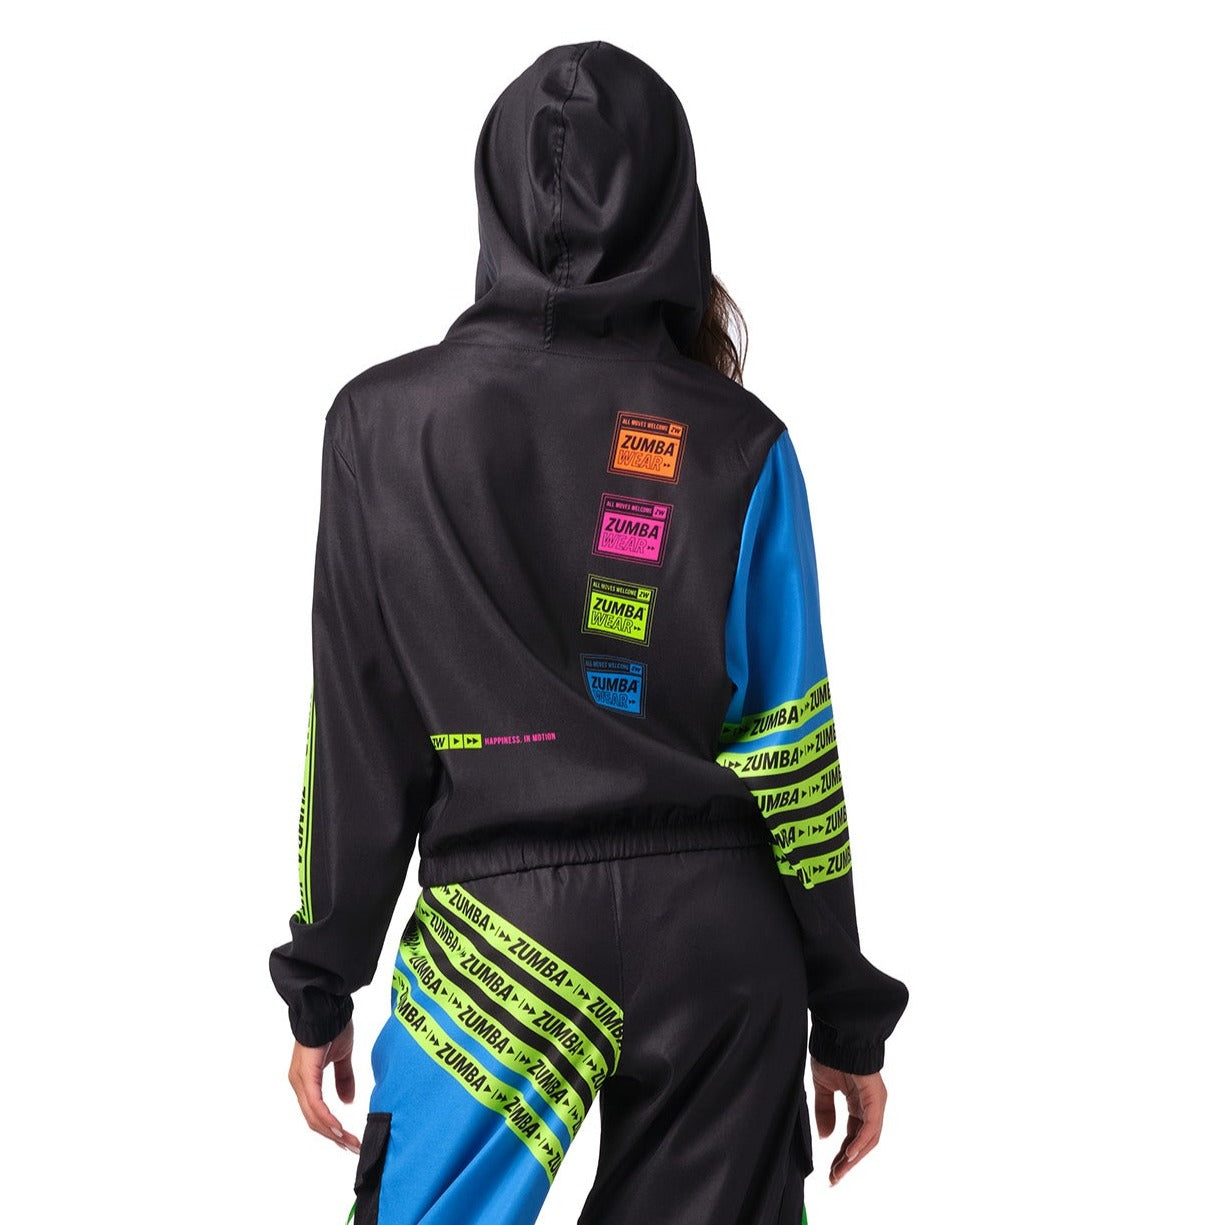 Zumba In Color Pullover Jacket